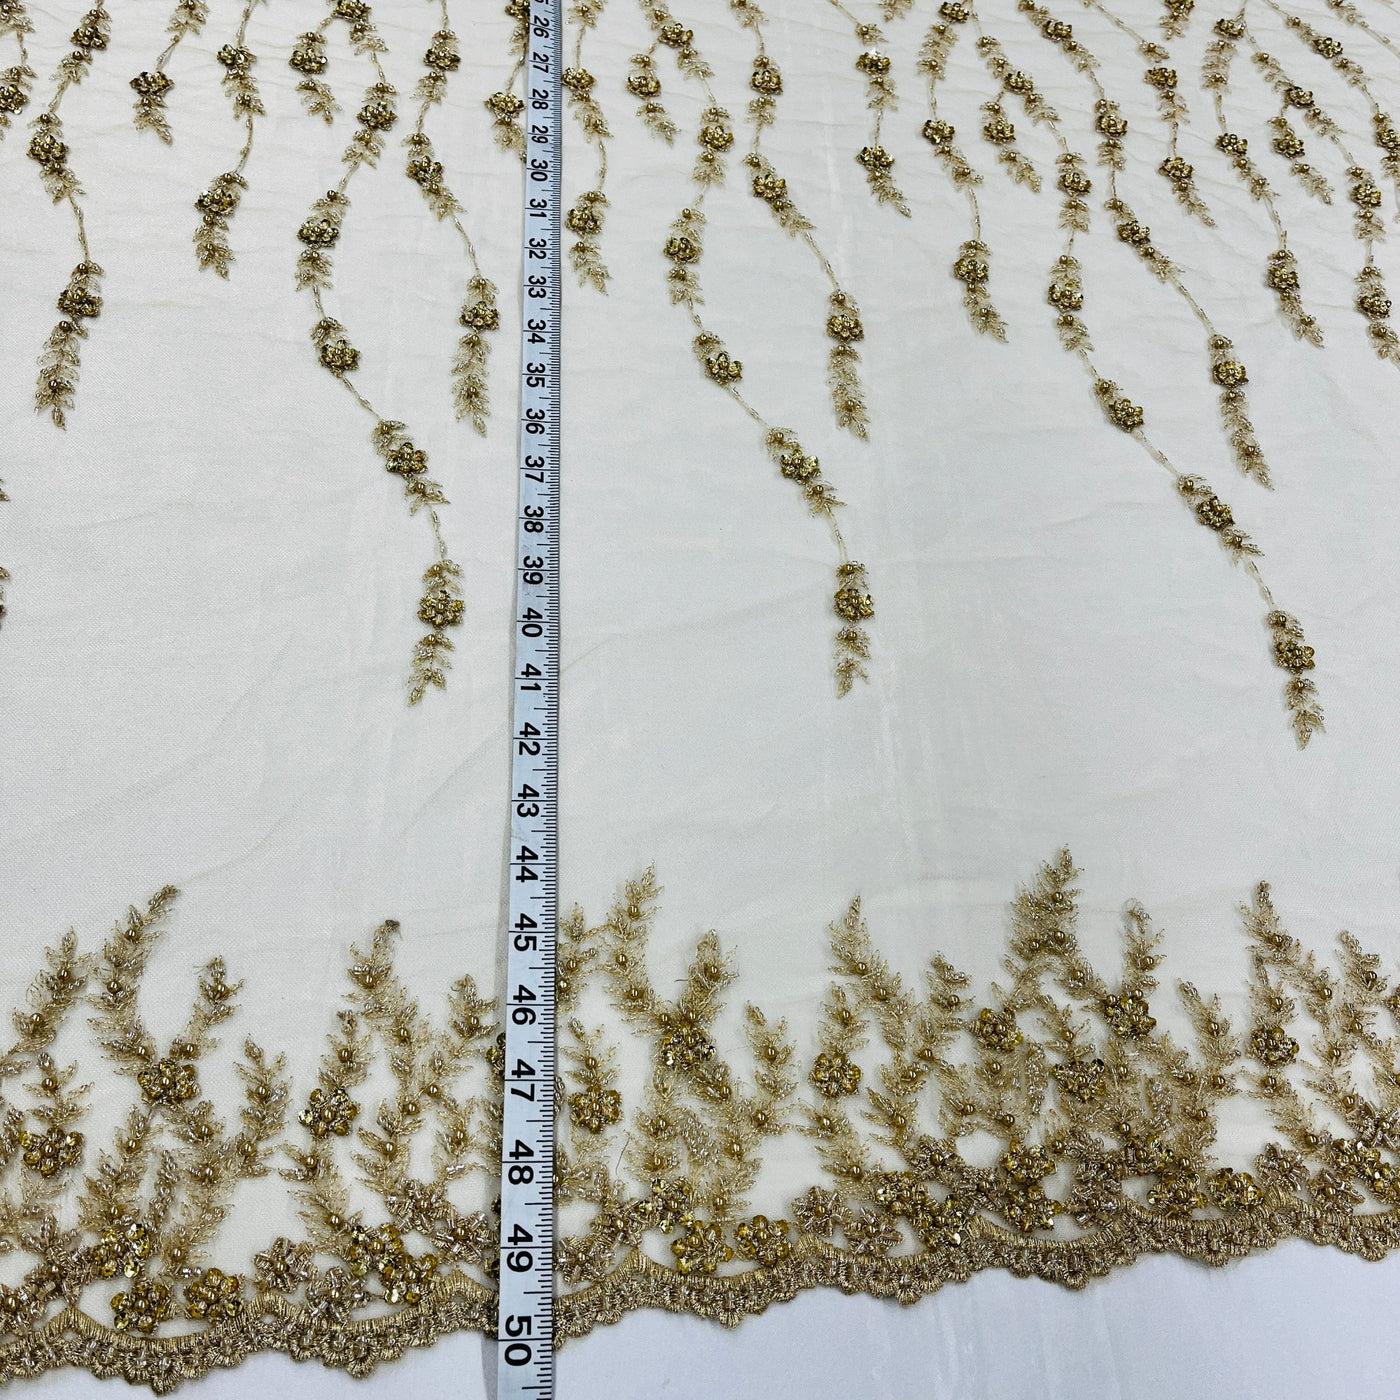 Beaded Lace Fabric Embroidered on 100% Polyester Net Mesh | Lace USA - GD-18613 Gold